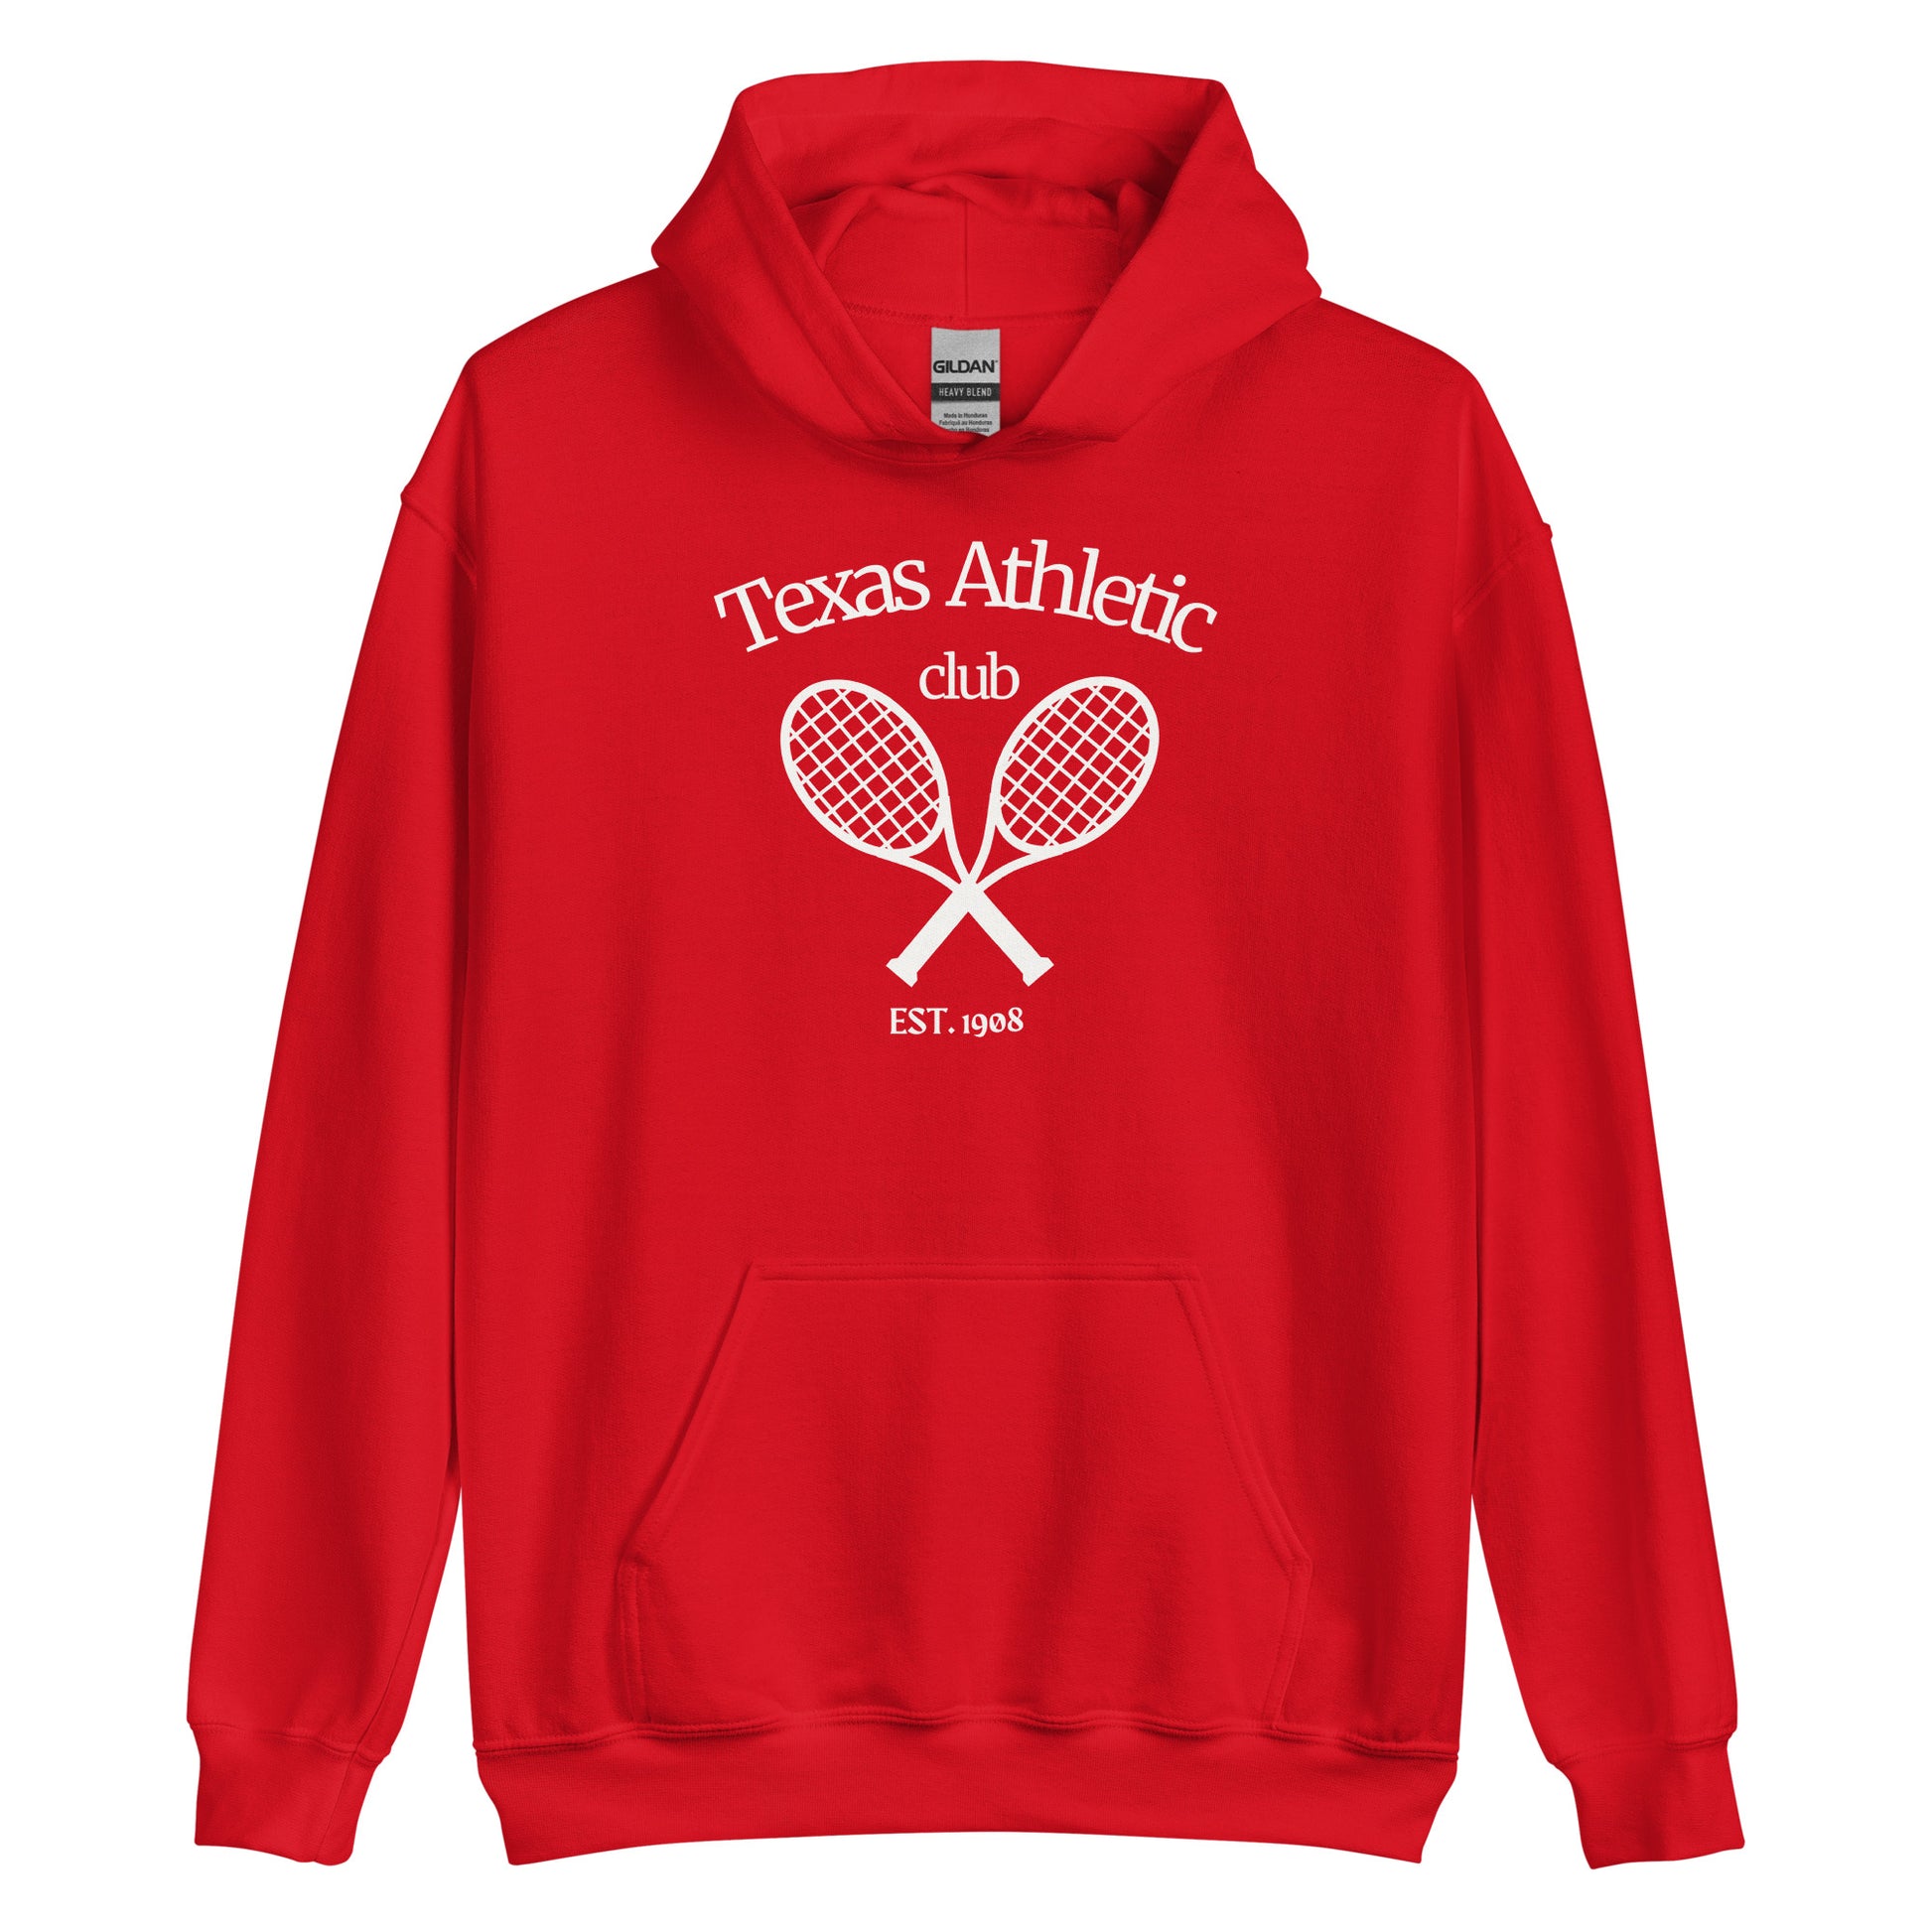 Red hoodie with white 'Texas Athletic Club' text and crossed tennis rackets graphic, front pouch pocket, ribbed cuffs and hem, displayed on a plain background.